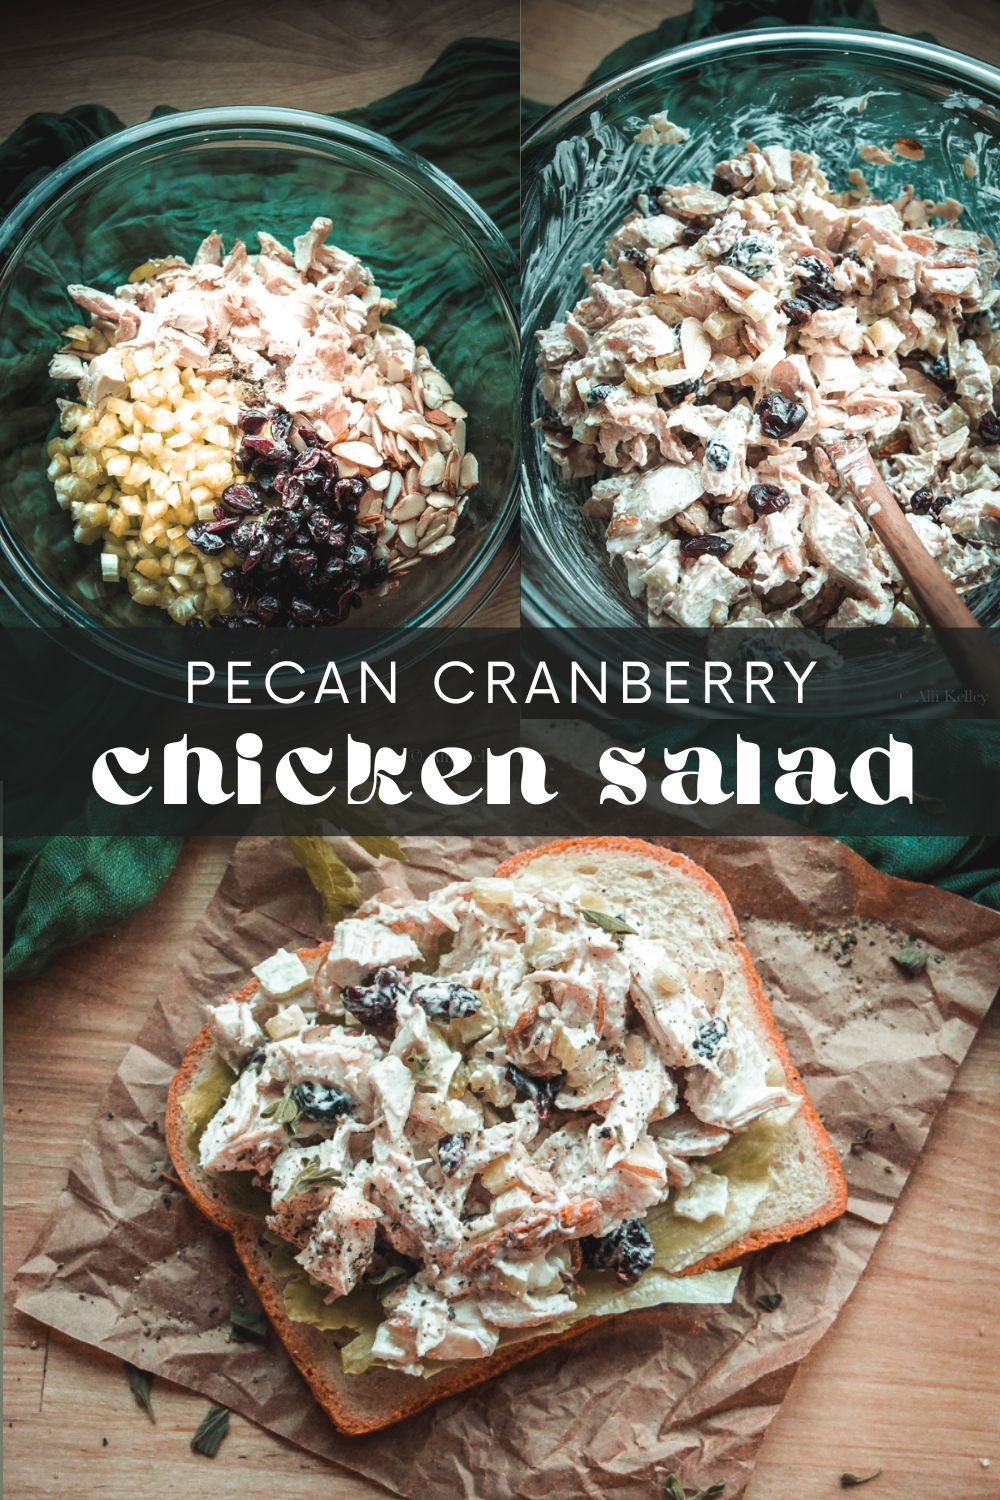 My cranberry chicken salad is perfect for when you want something both fresh and filling! With succulent chicken, sweet cranberries, and crisp celery, this salad is bursting with flavor. And it's so easy to make you'll be whipping it up in no time!